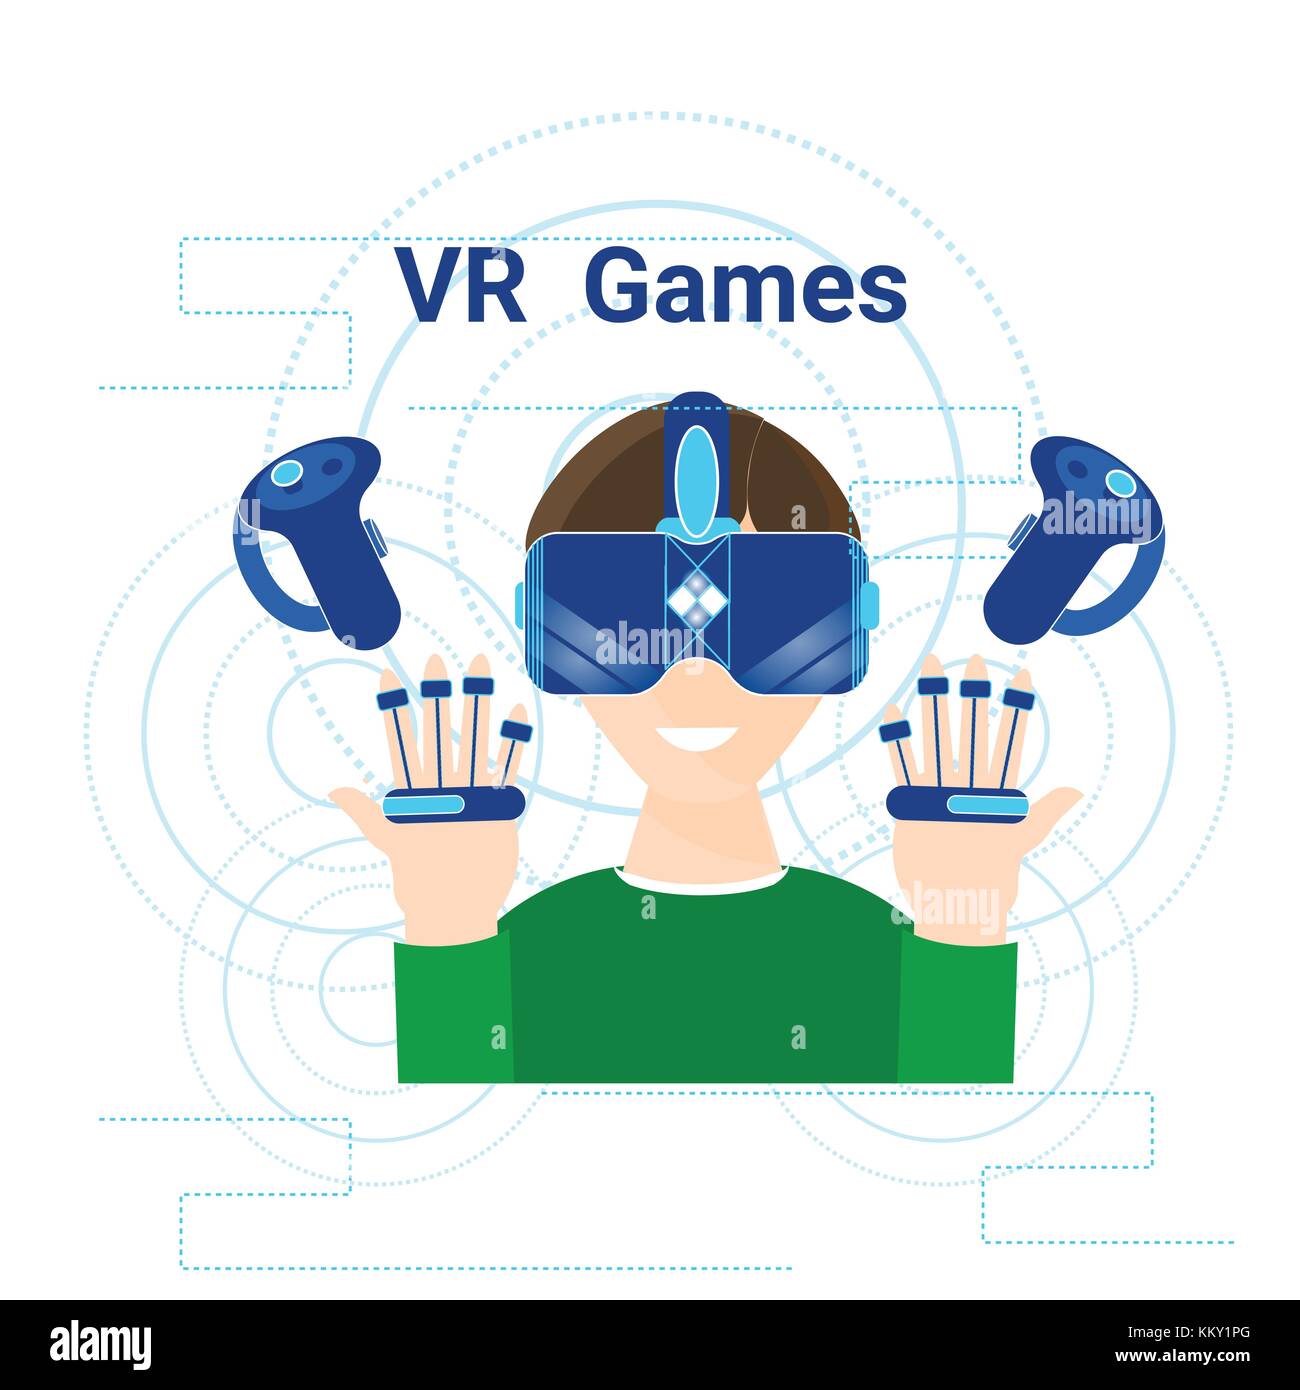 Vr Games Banner Man Wearing Virtual Reality Headset Modern Gaming Technology Concept Stock Vector